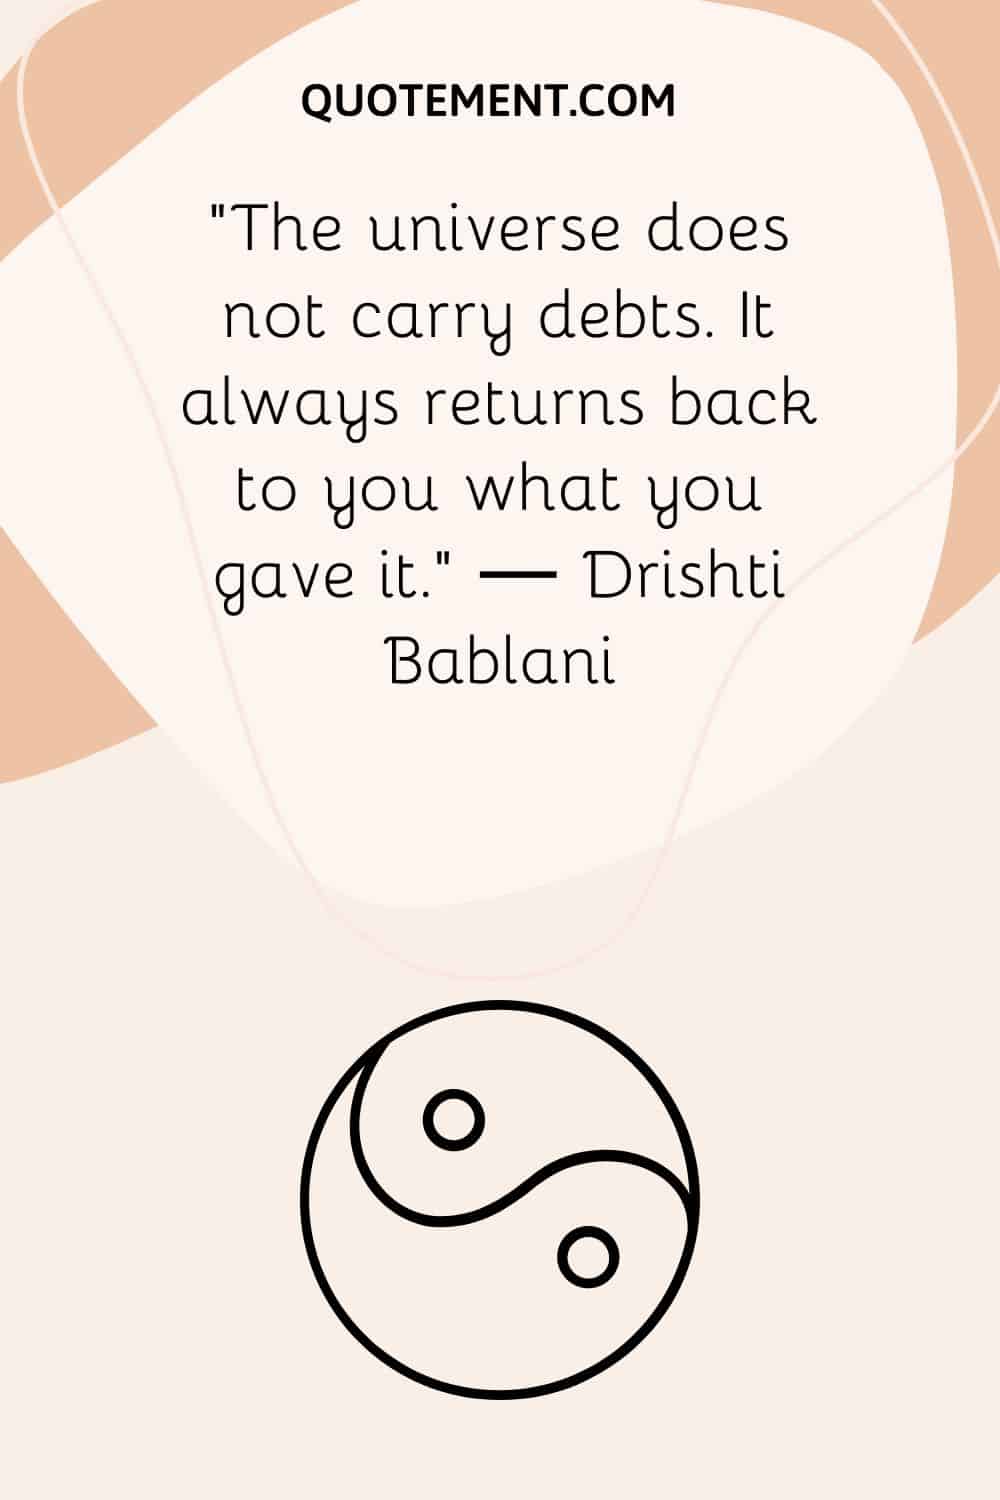 The universe does not carry debts. It always returns back to you what you gave it